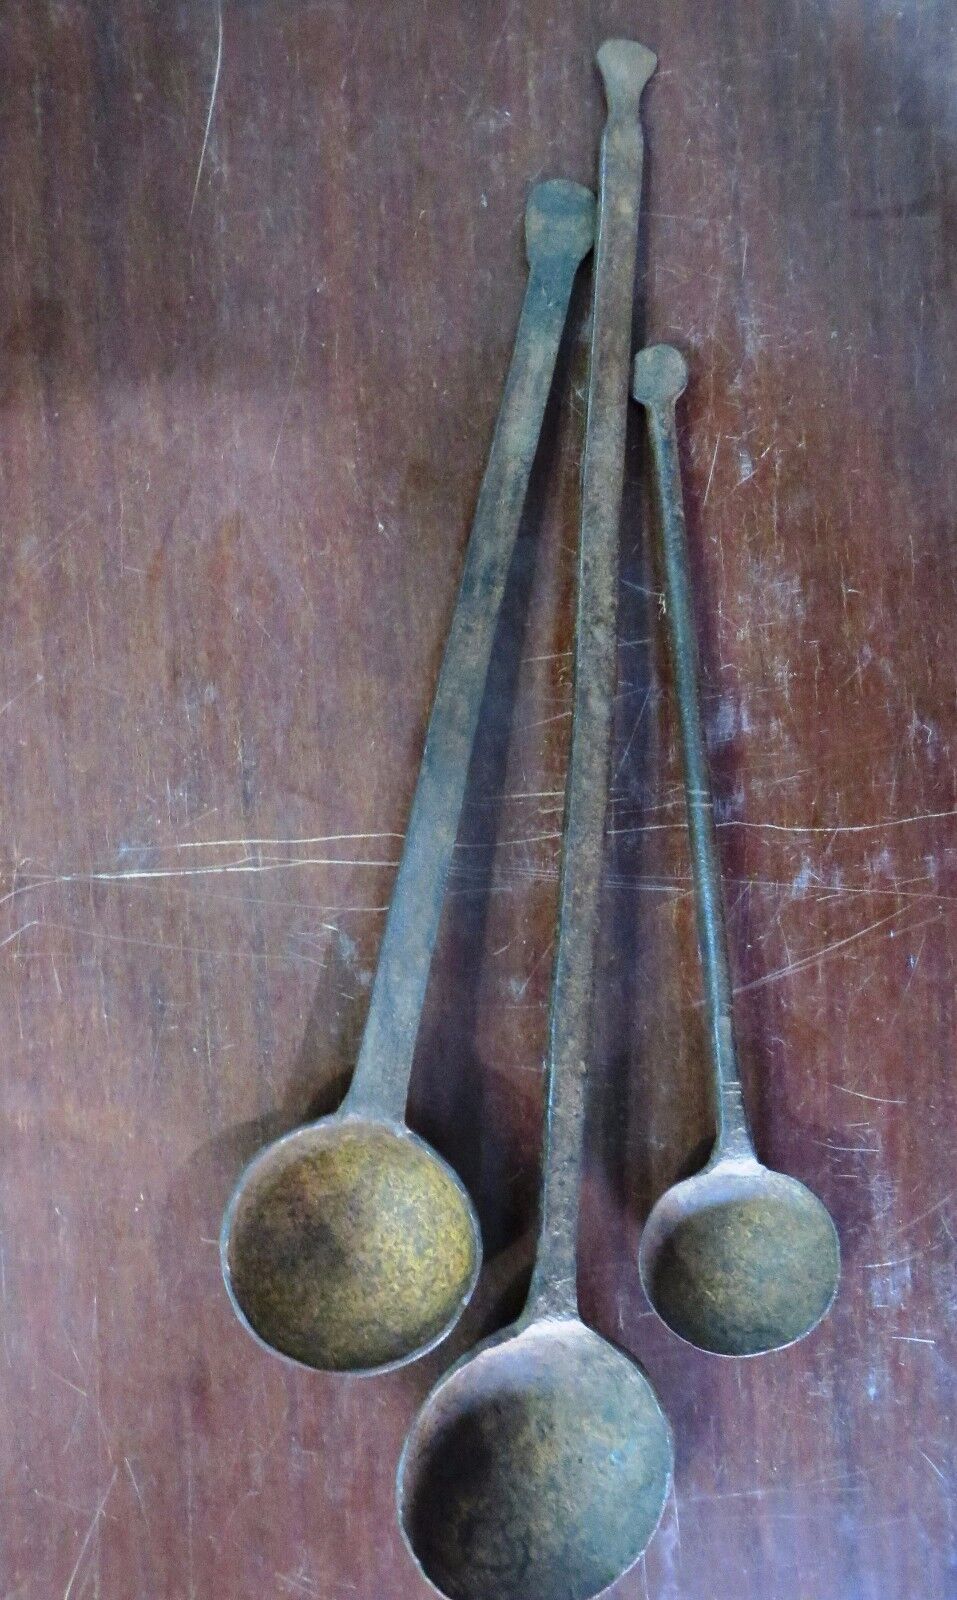 Aged Kitchen Spoon Forged Hammered Iron tools Mix lot 3pcs variety C1900 